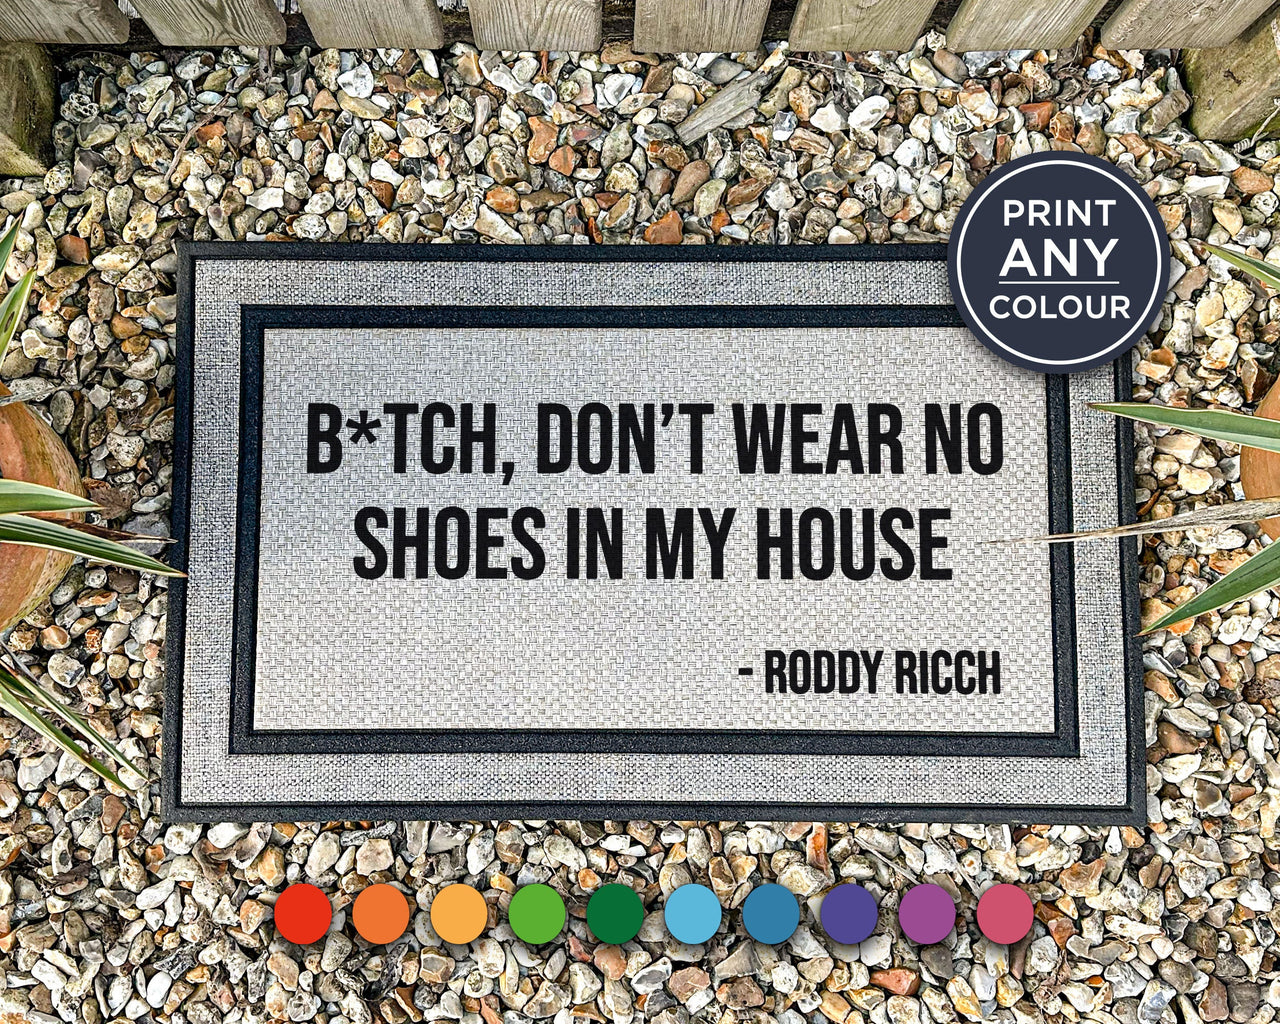 Roddy Ricch Doormat - b*tch don't wear no shoes in my house